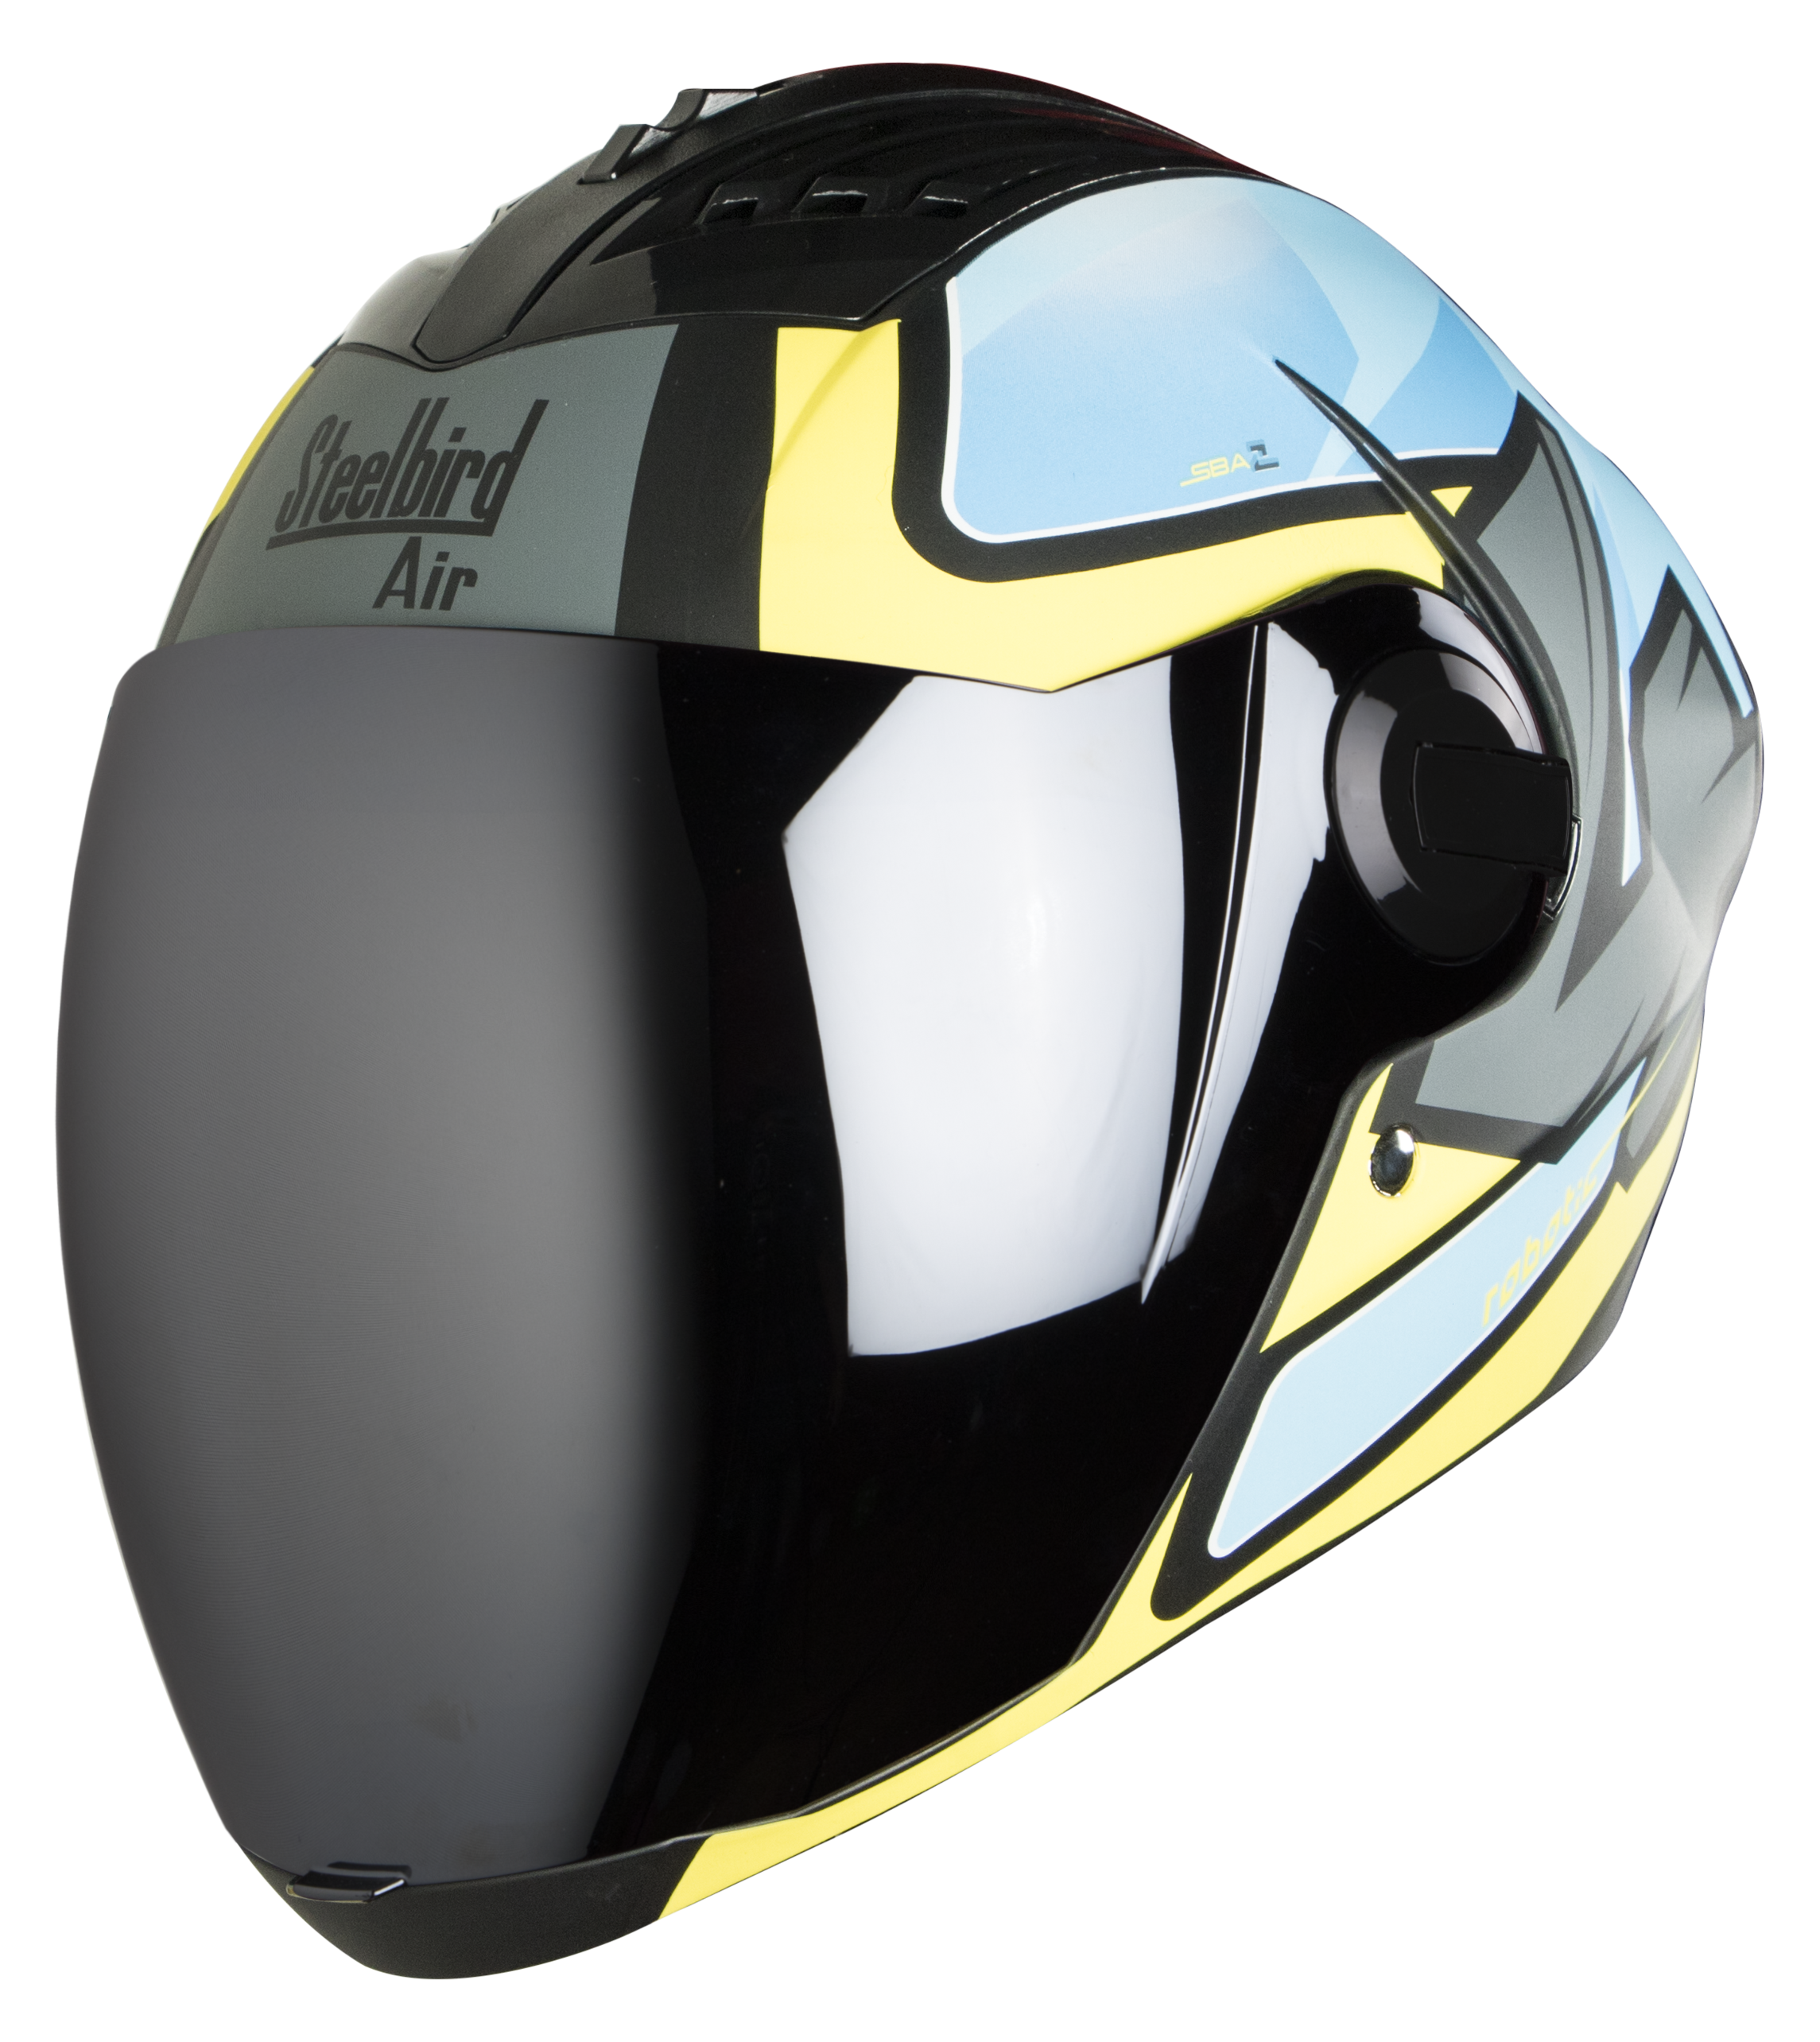 SBA-2 ROBOTICS MAT BLACK WITH BLUE AND YELLOW  ( Fitted With Clear Visor  Extra Silver Chrome Visor Free)